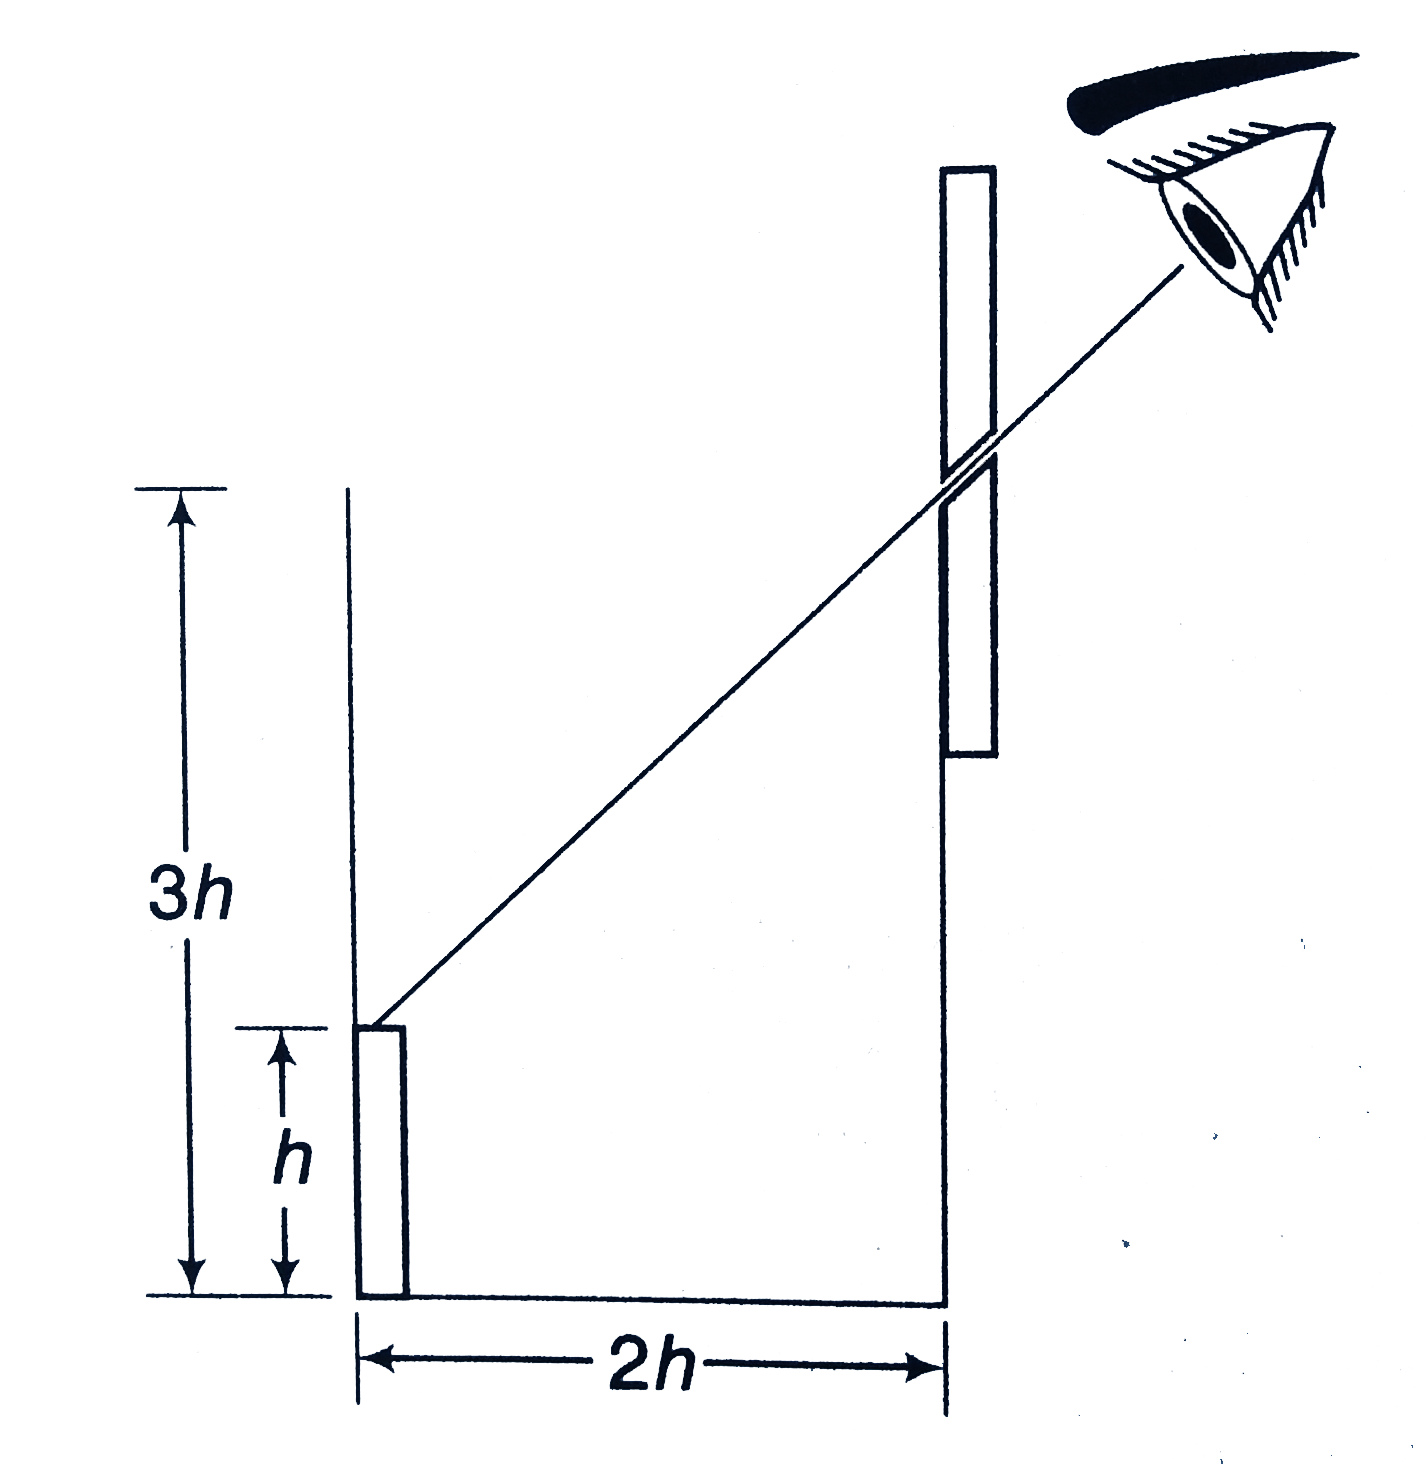 An observer can see through a pin-hole the top end of a thin    rod of height h,placed as shown in the figure. The beaker height is 3h and its radius h. When the beaker is filled with a liquid up to a height 2h, he can see the lower end of the rod. Then, the refractive index of the liquid is         (a) 5/2 ,  (b) sqrt((5)/(2)) , (c) sqrt((3)/(2)) , (d) (3)/(2)